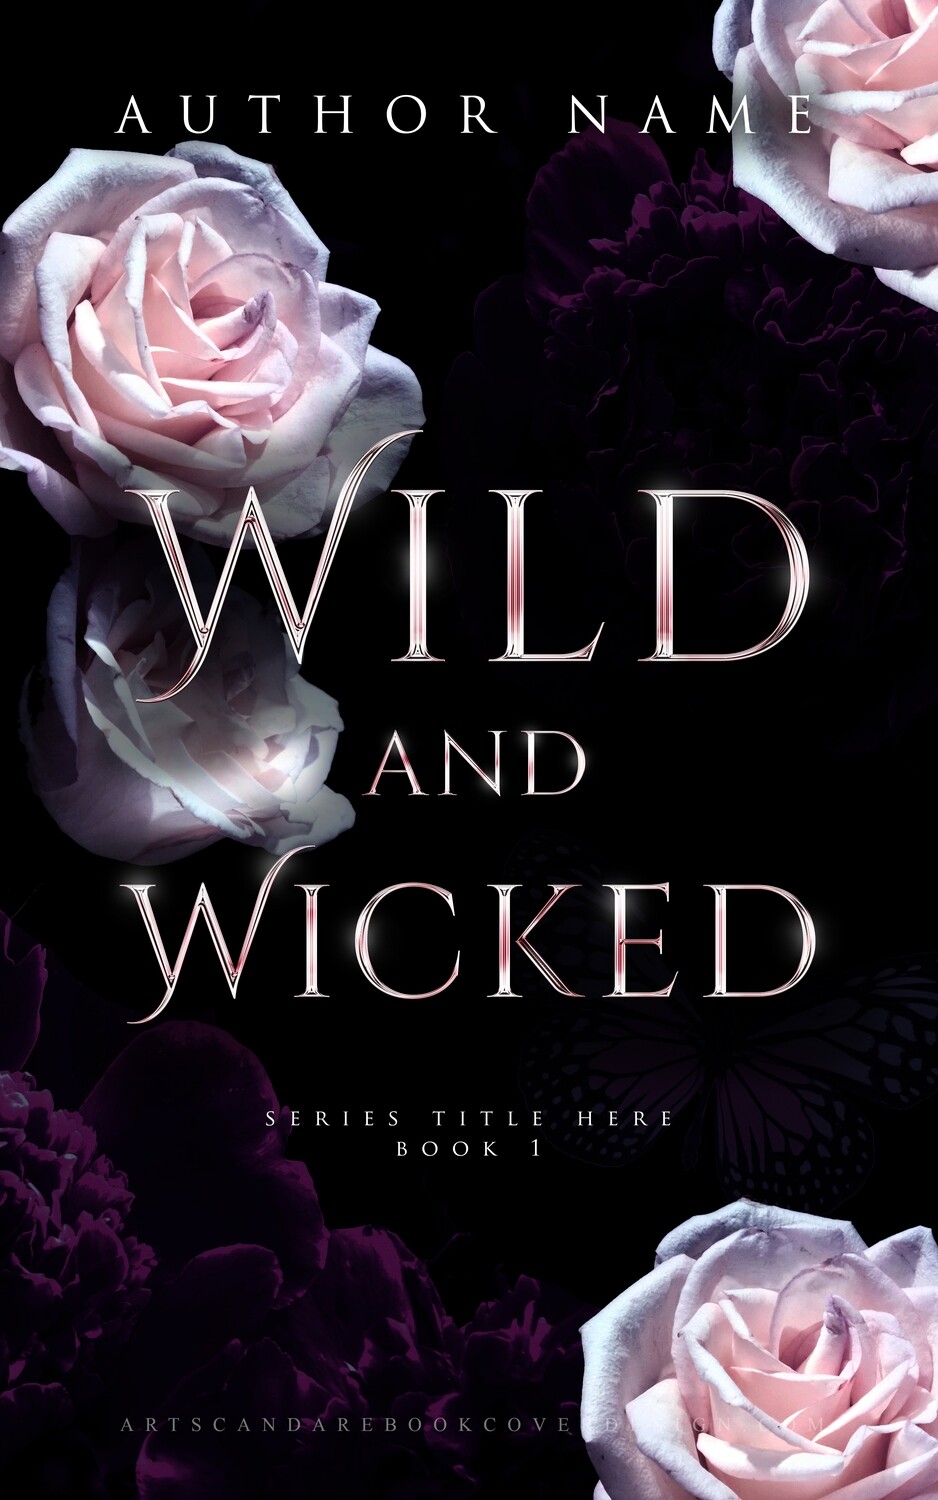 WILD AND WICKED